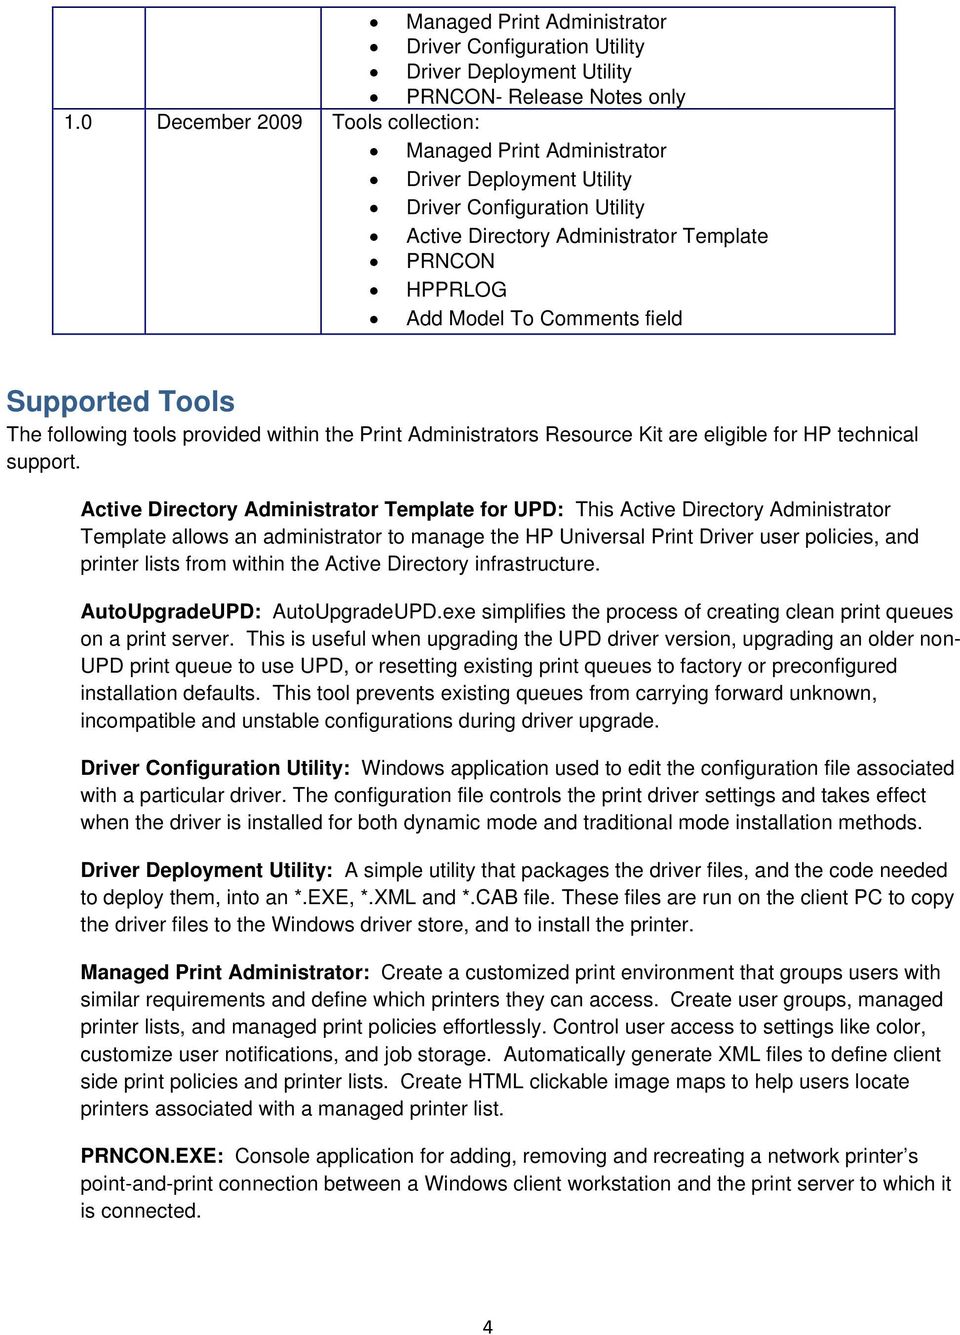 Active Directory Administrator Template for UPD: This Active Directory Administrator Template allows an administrator to manage the HP Universal Print Driver user policies, and printer lists from